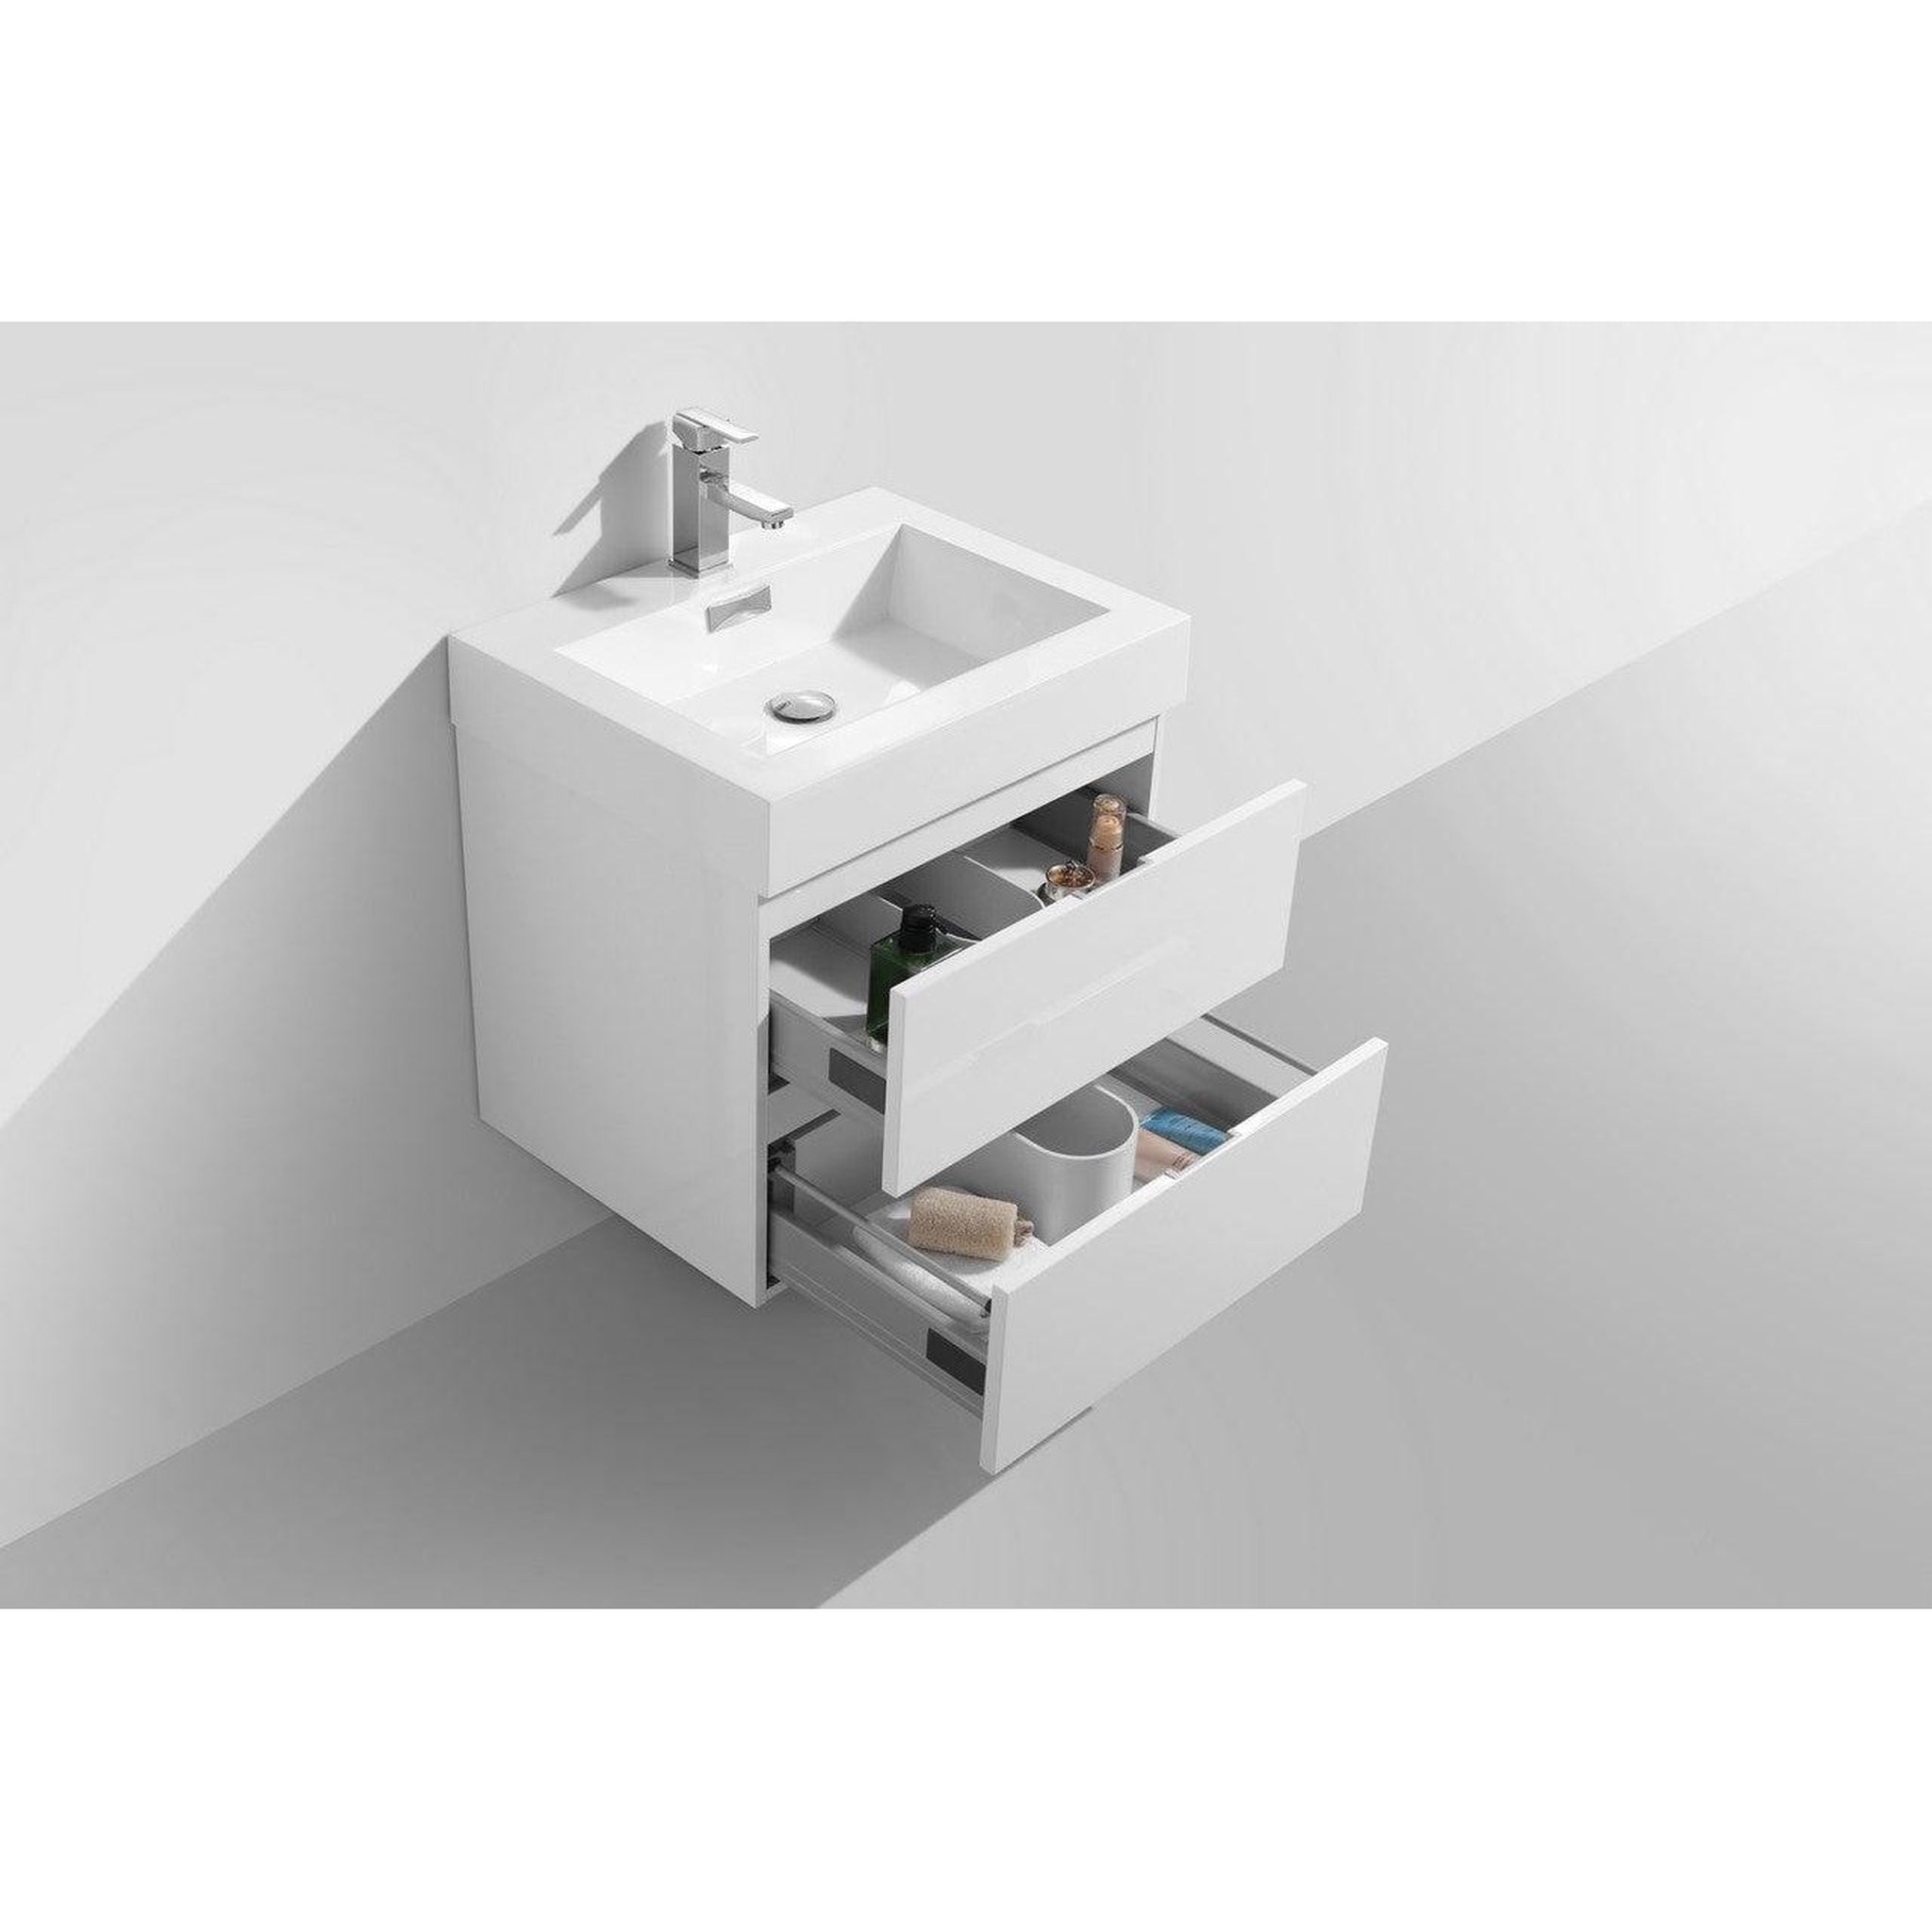 KubeBath, KubeBath Bliss 24" High Gloss White Wall-Mounted Modern Bathroom Vanity With Single Integrated Acrylic Sink With Overflow and 24" White Framed Mirror With Shelf